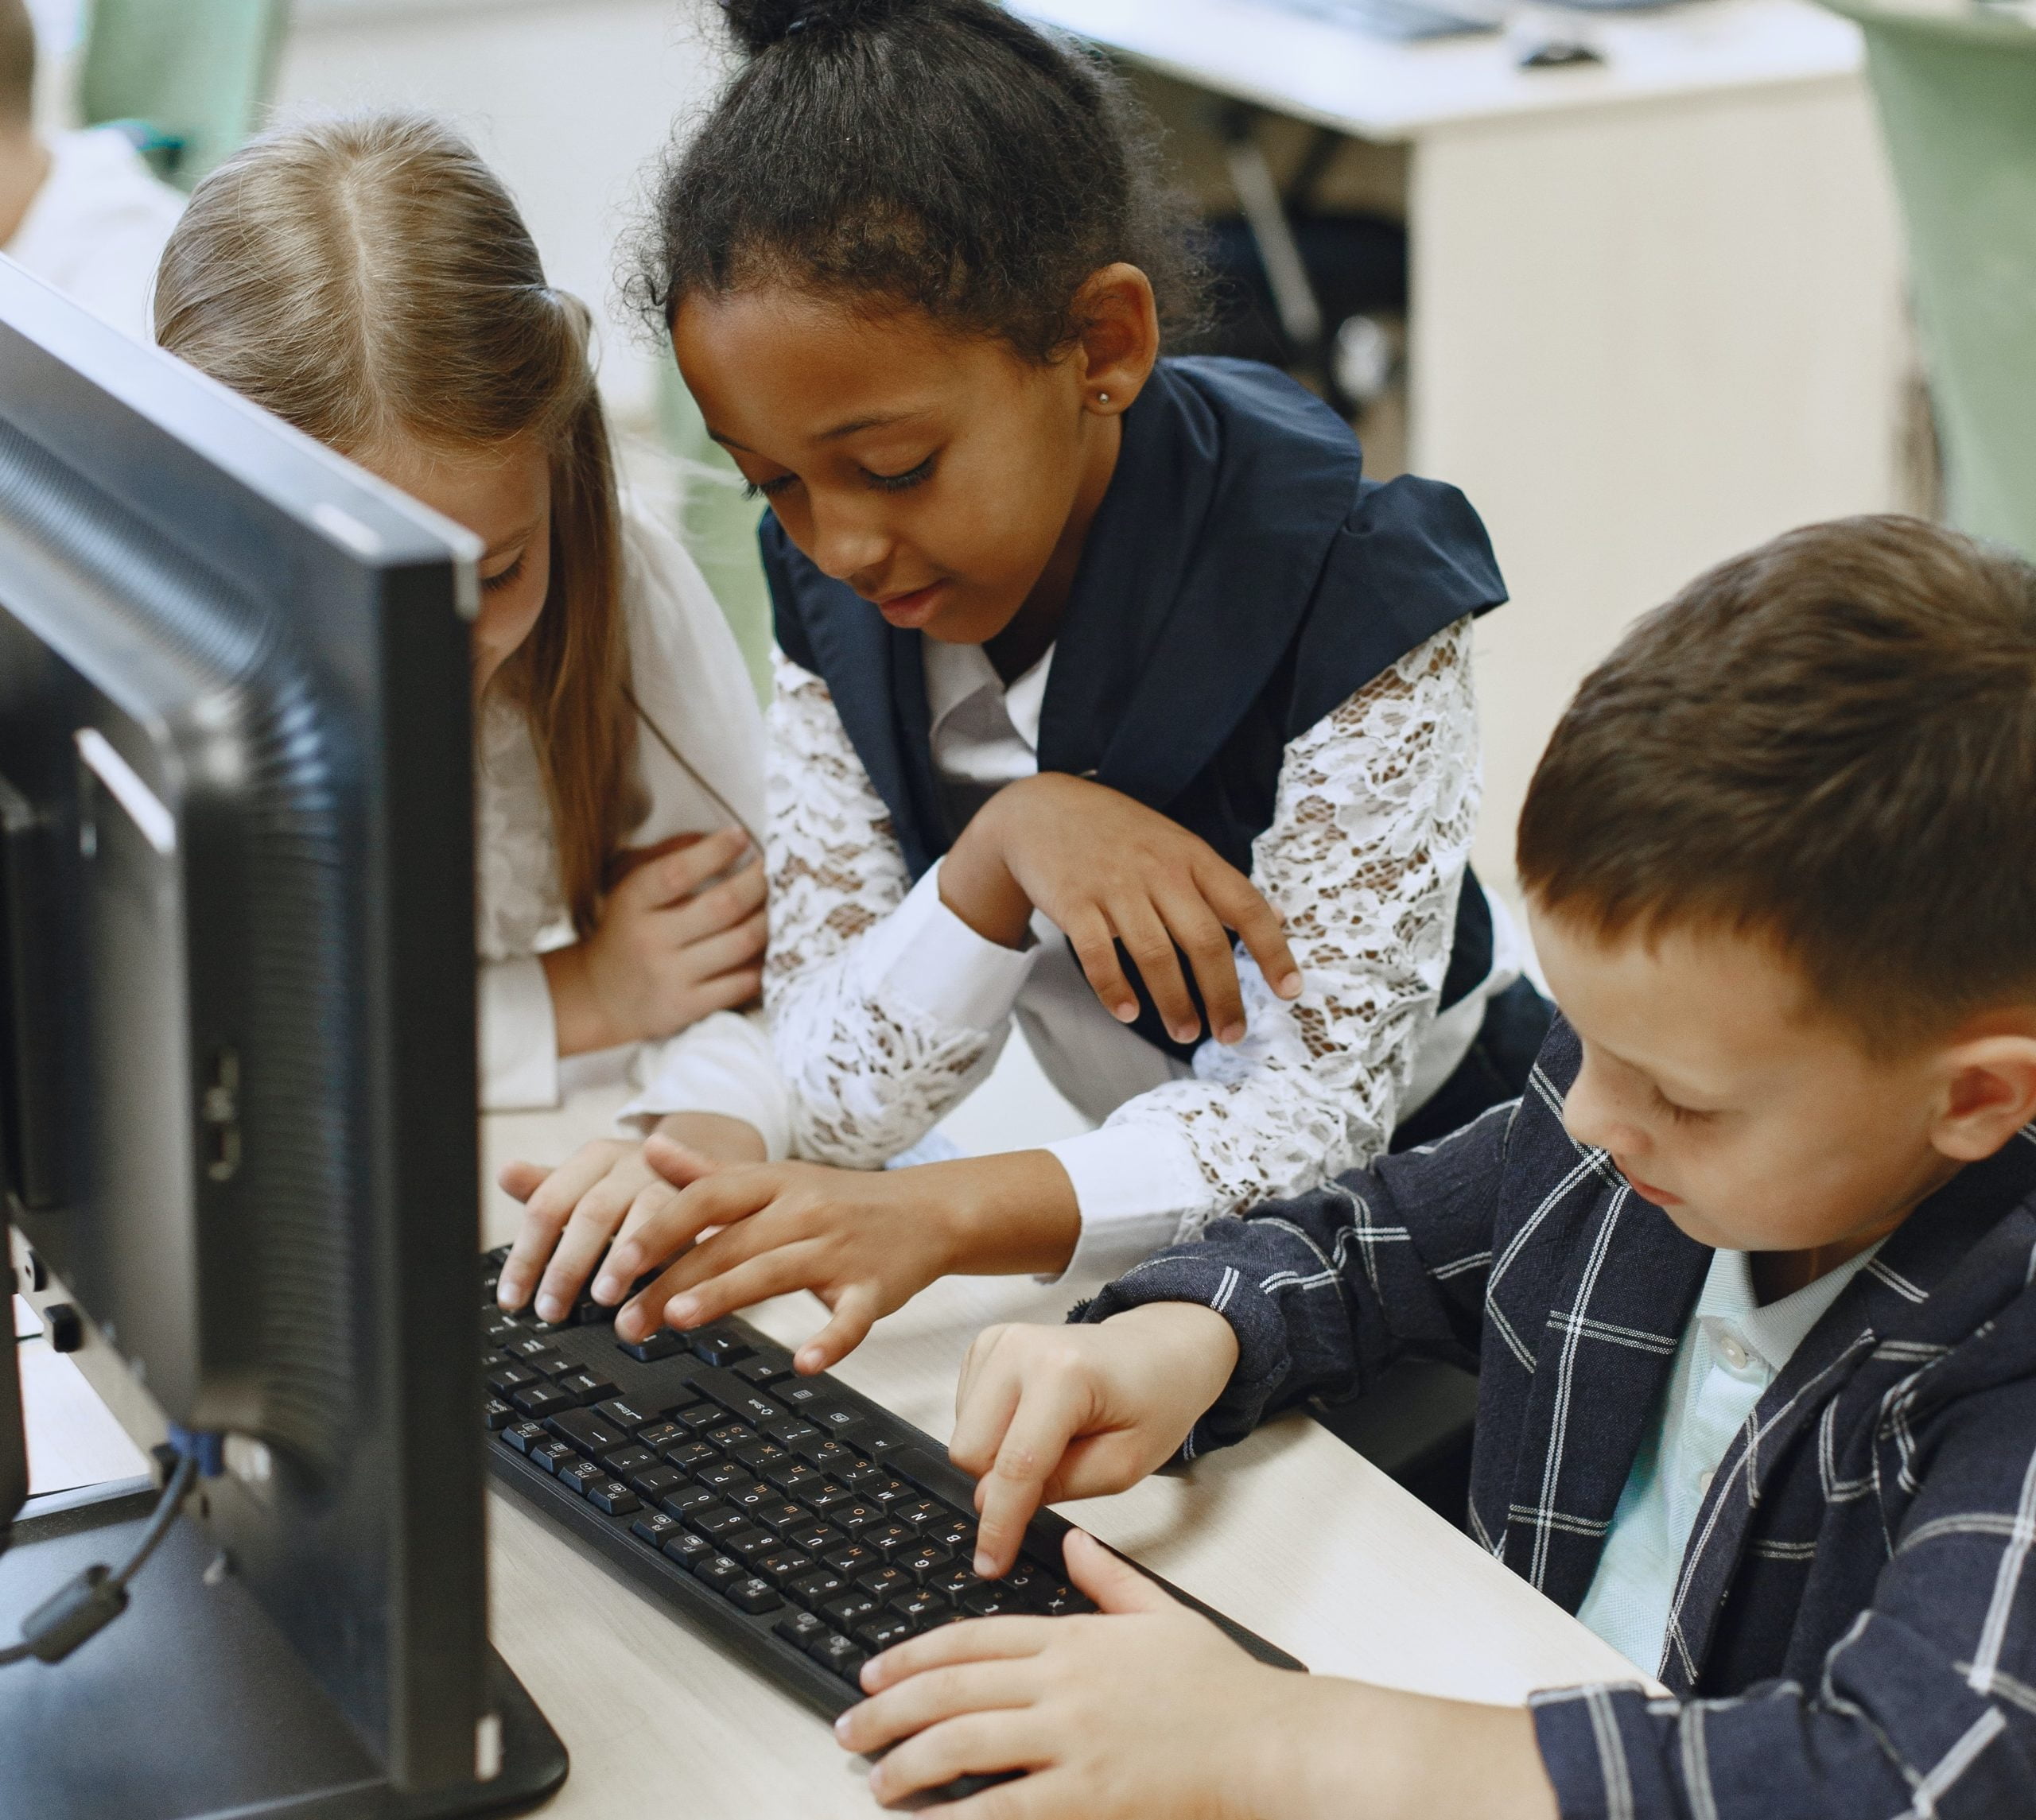 Three students, two girls and a boy, using a computer together in a classroom setting.